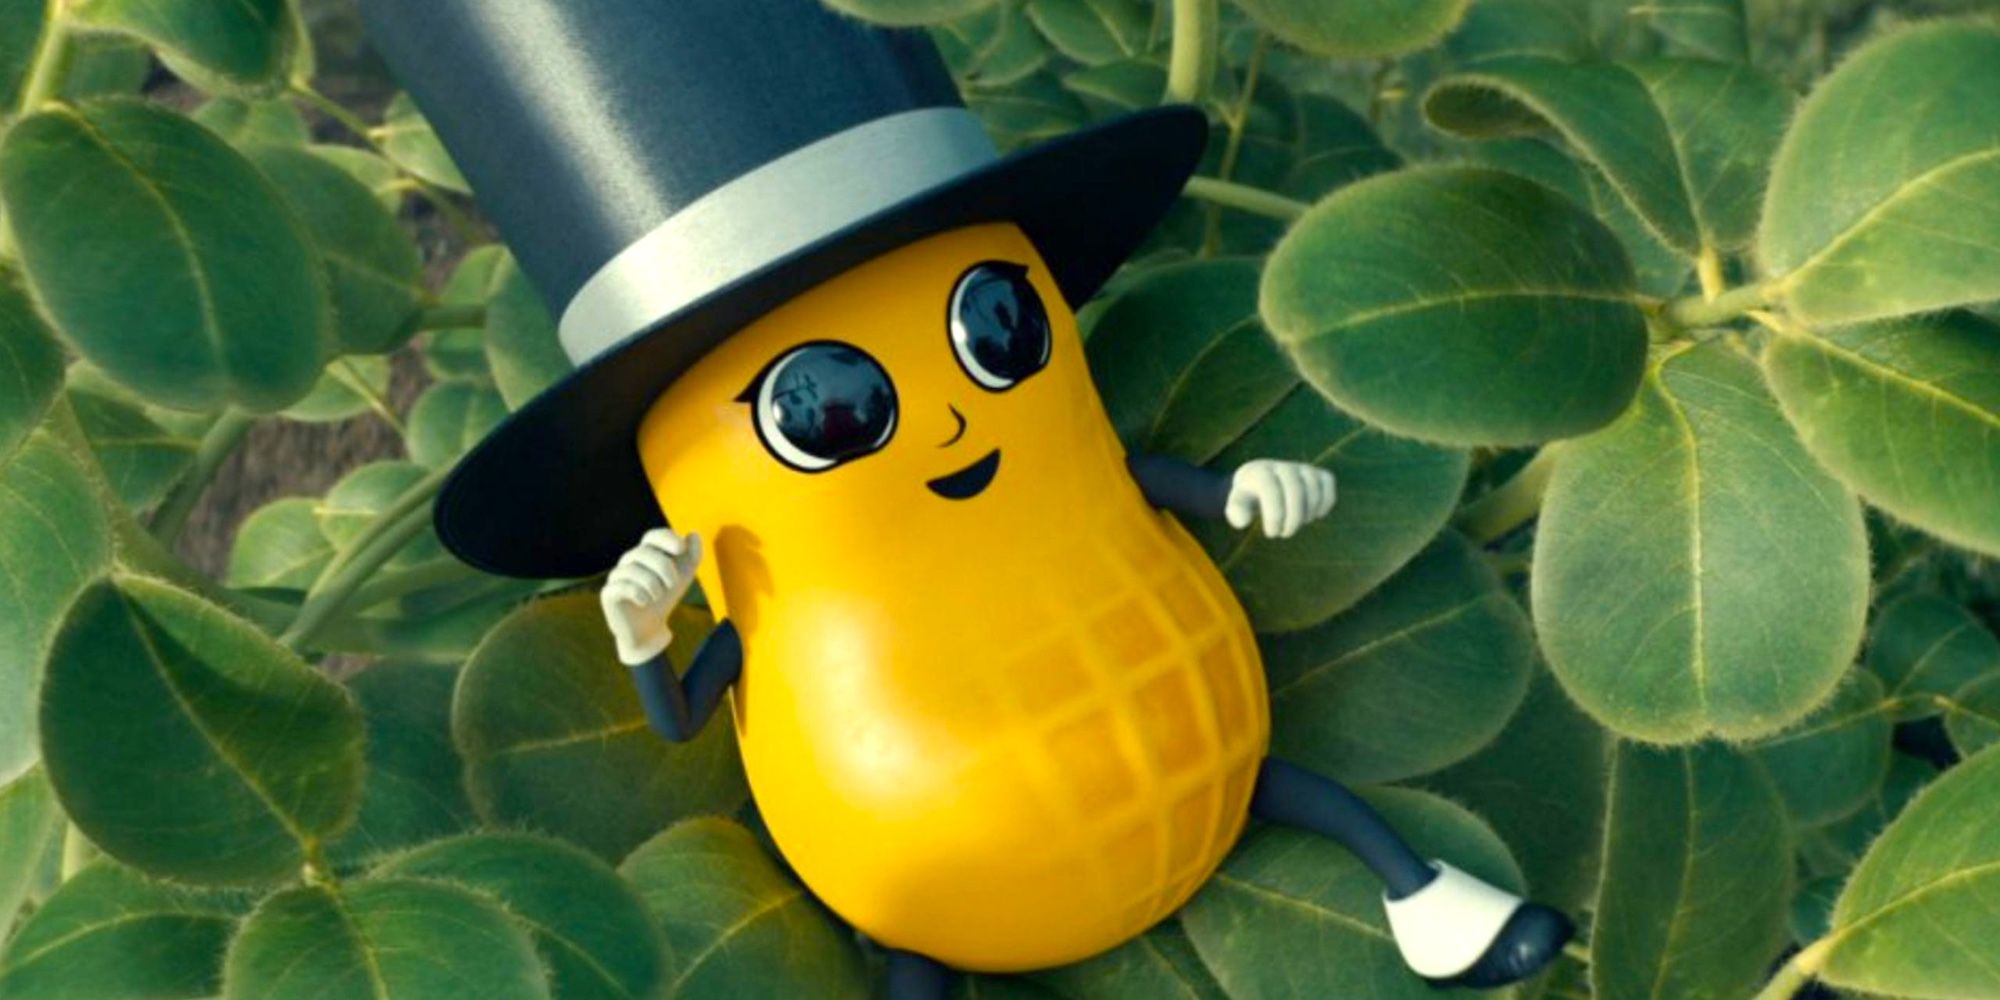 Planters Debuts Baby Nut In Super Bowl Ad